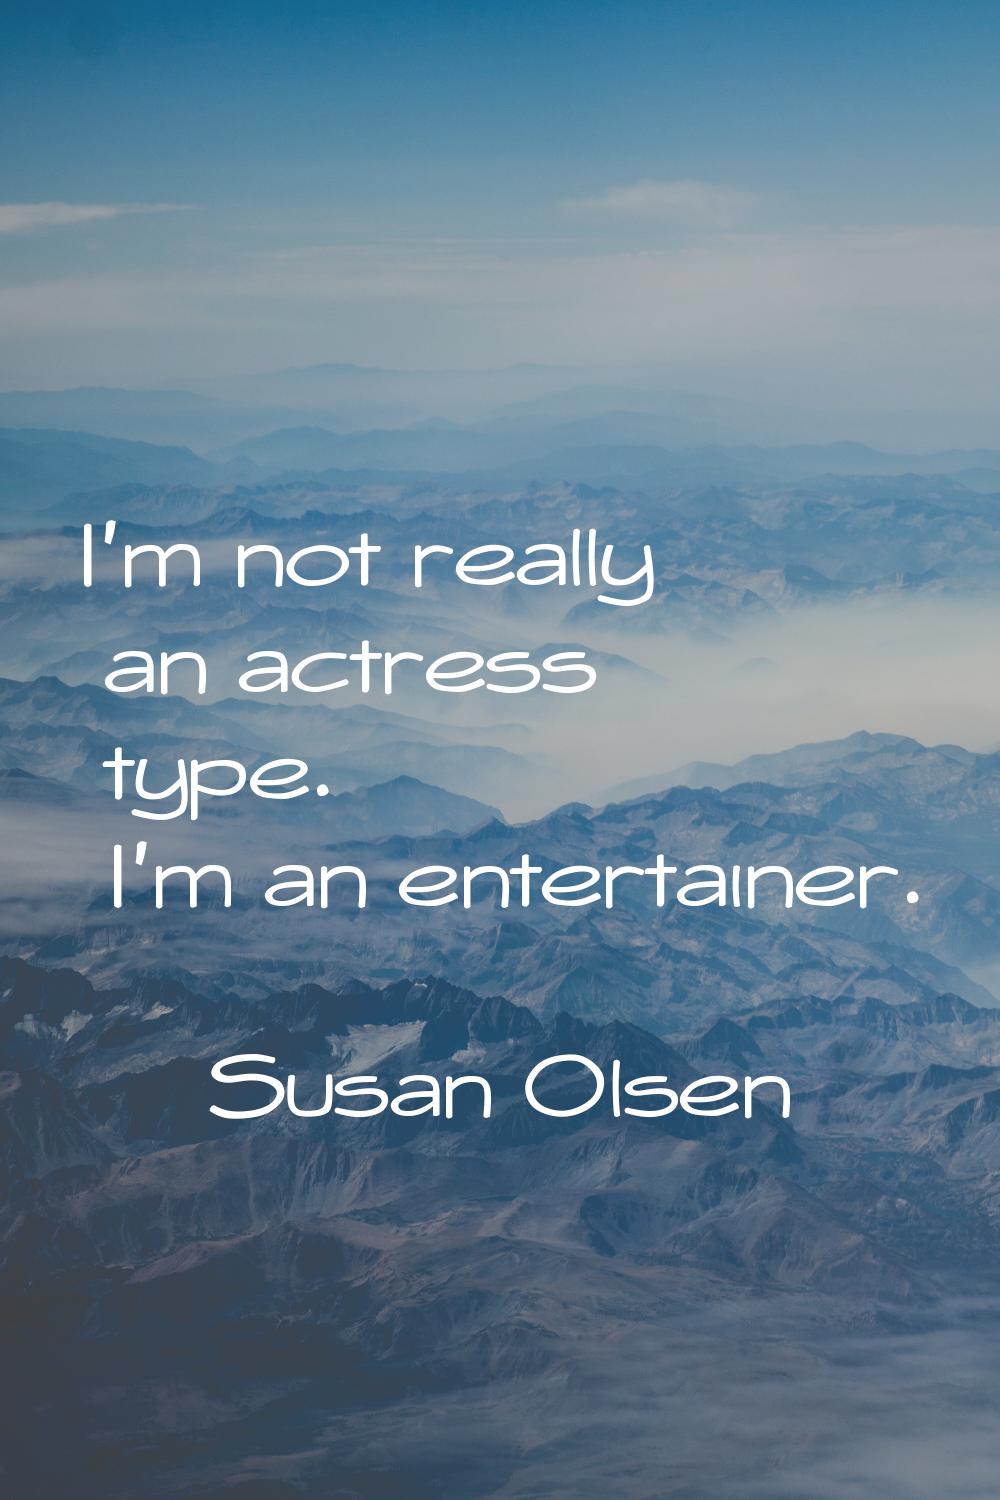 I'm not really an actress type. I'm an entertainer.